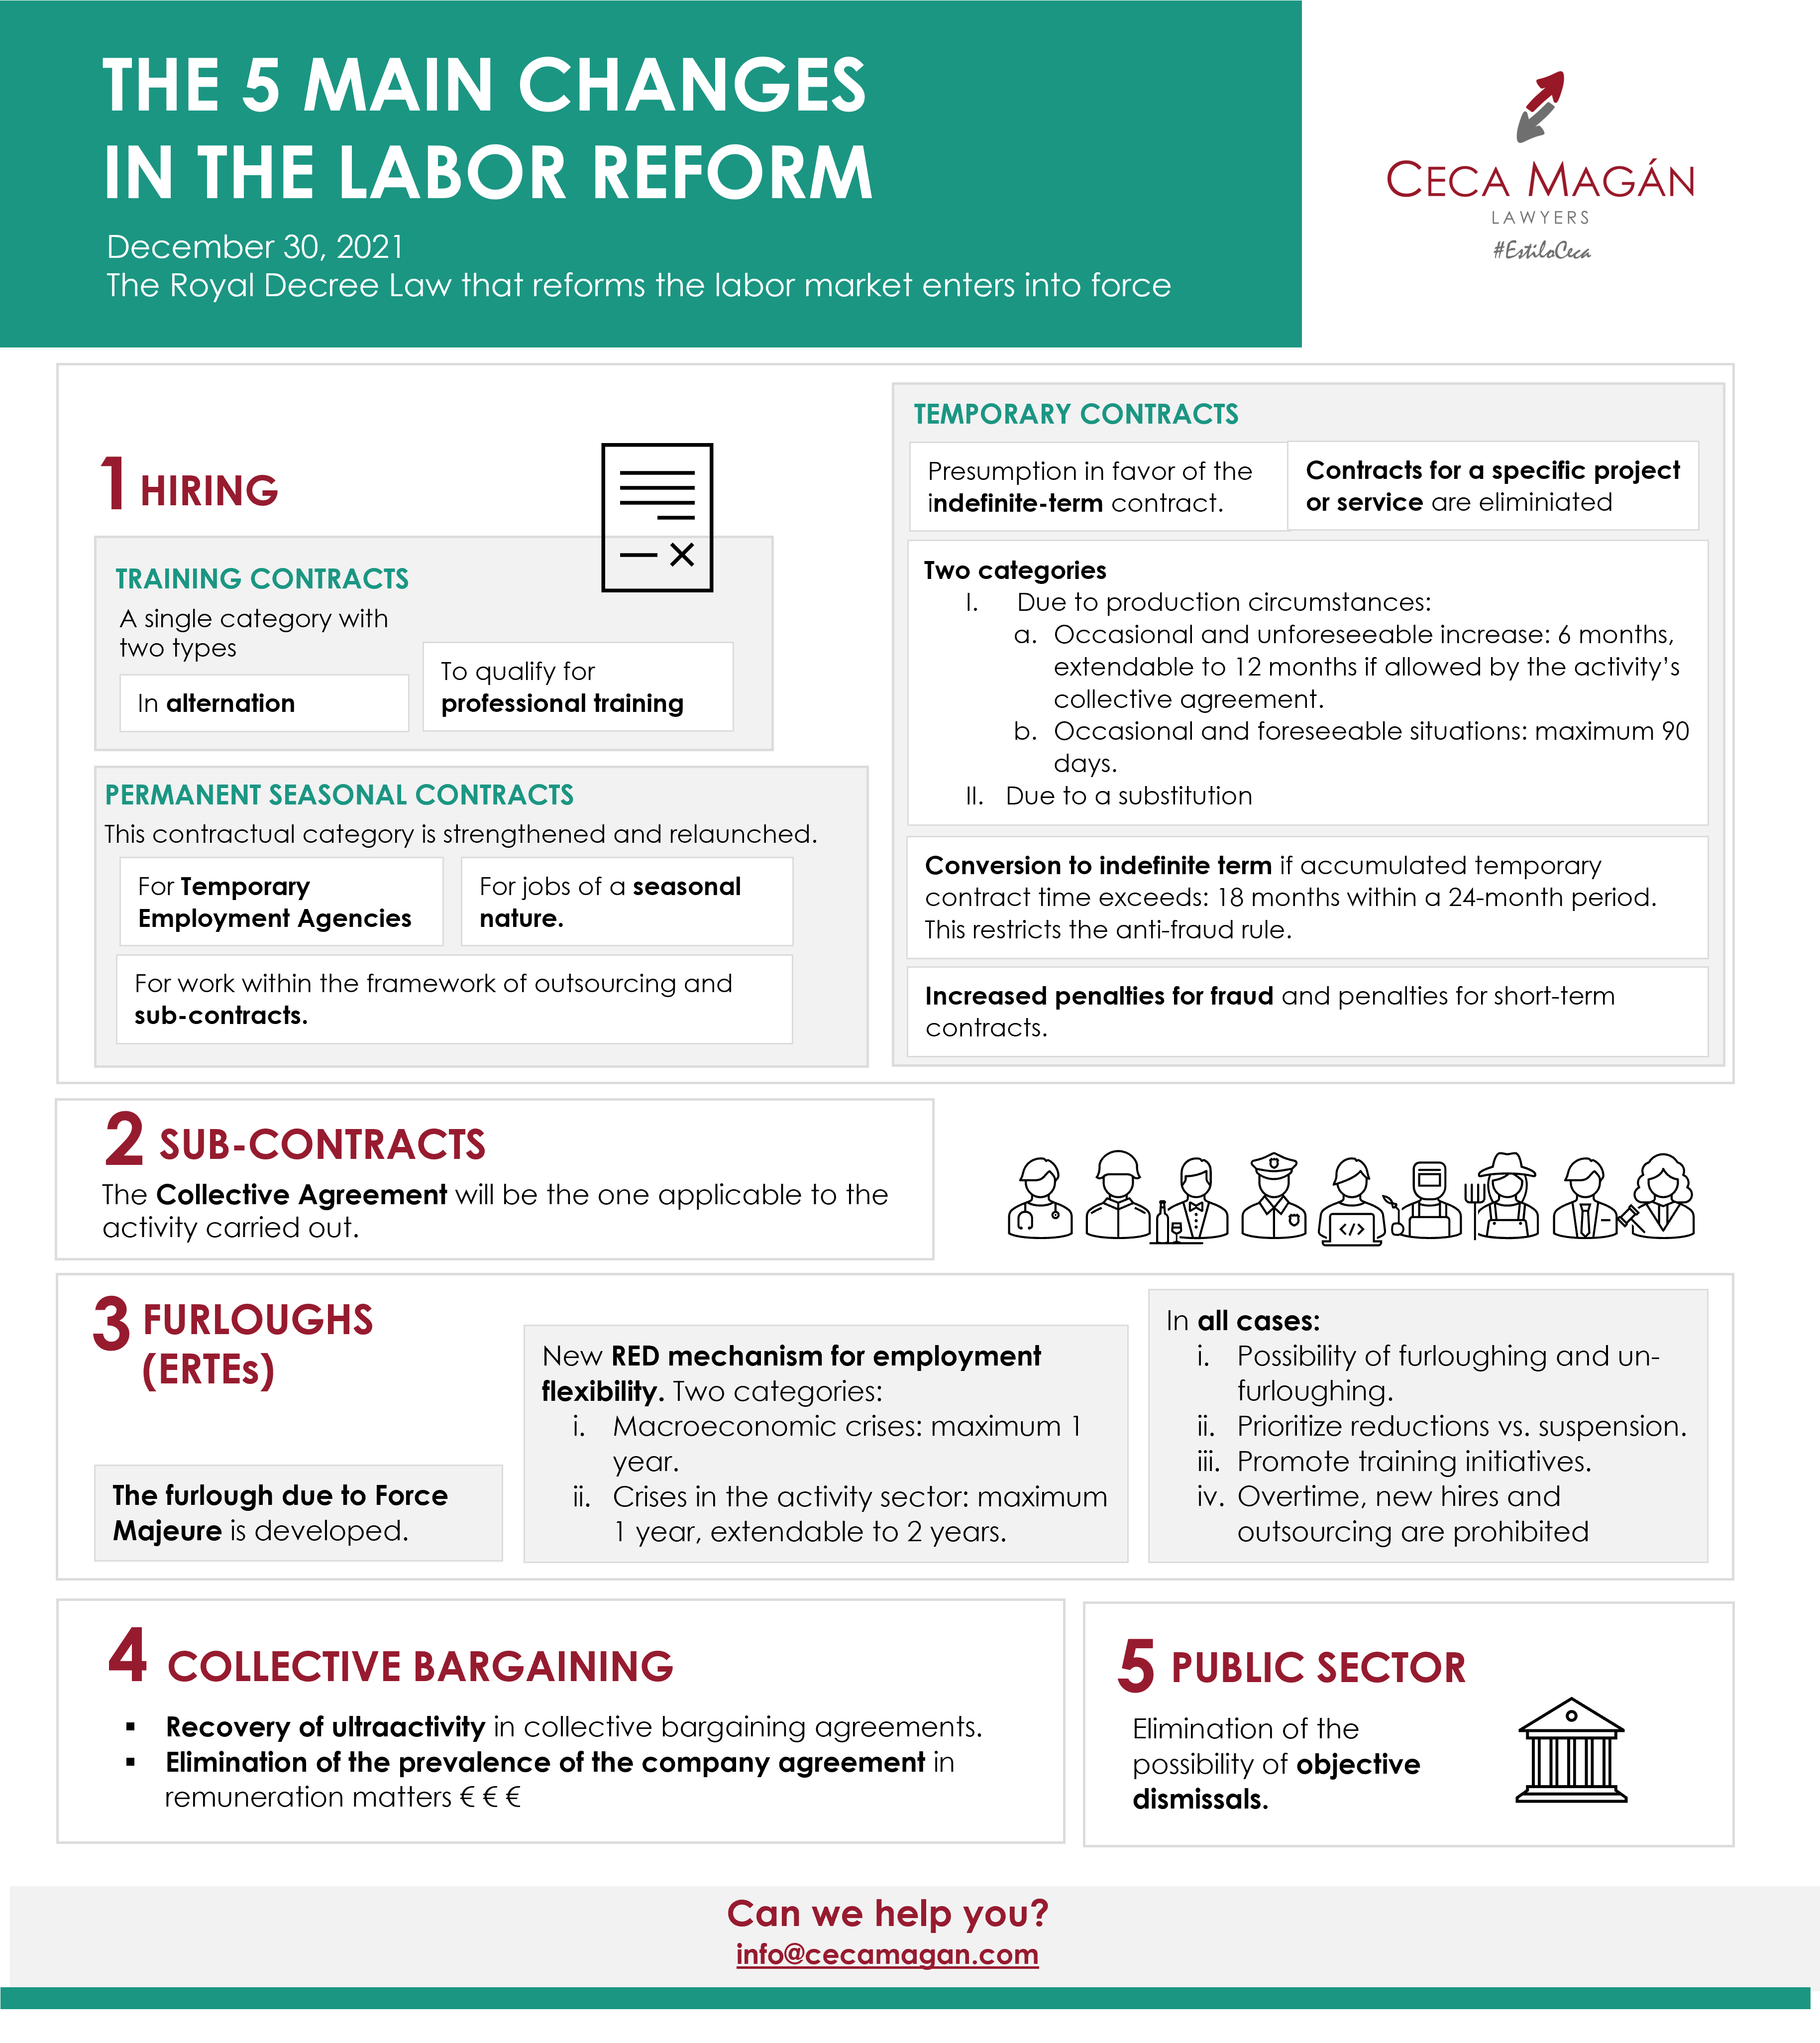 The 5 main changes in the labor reform